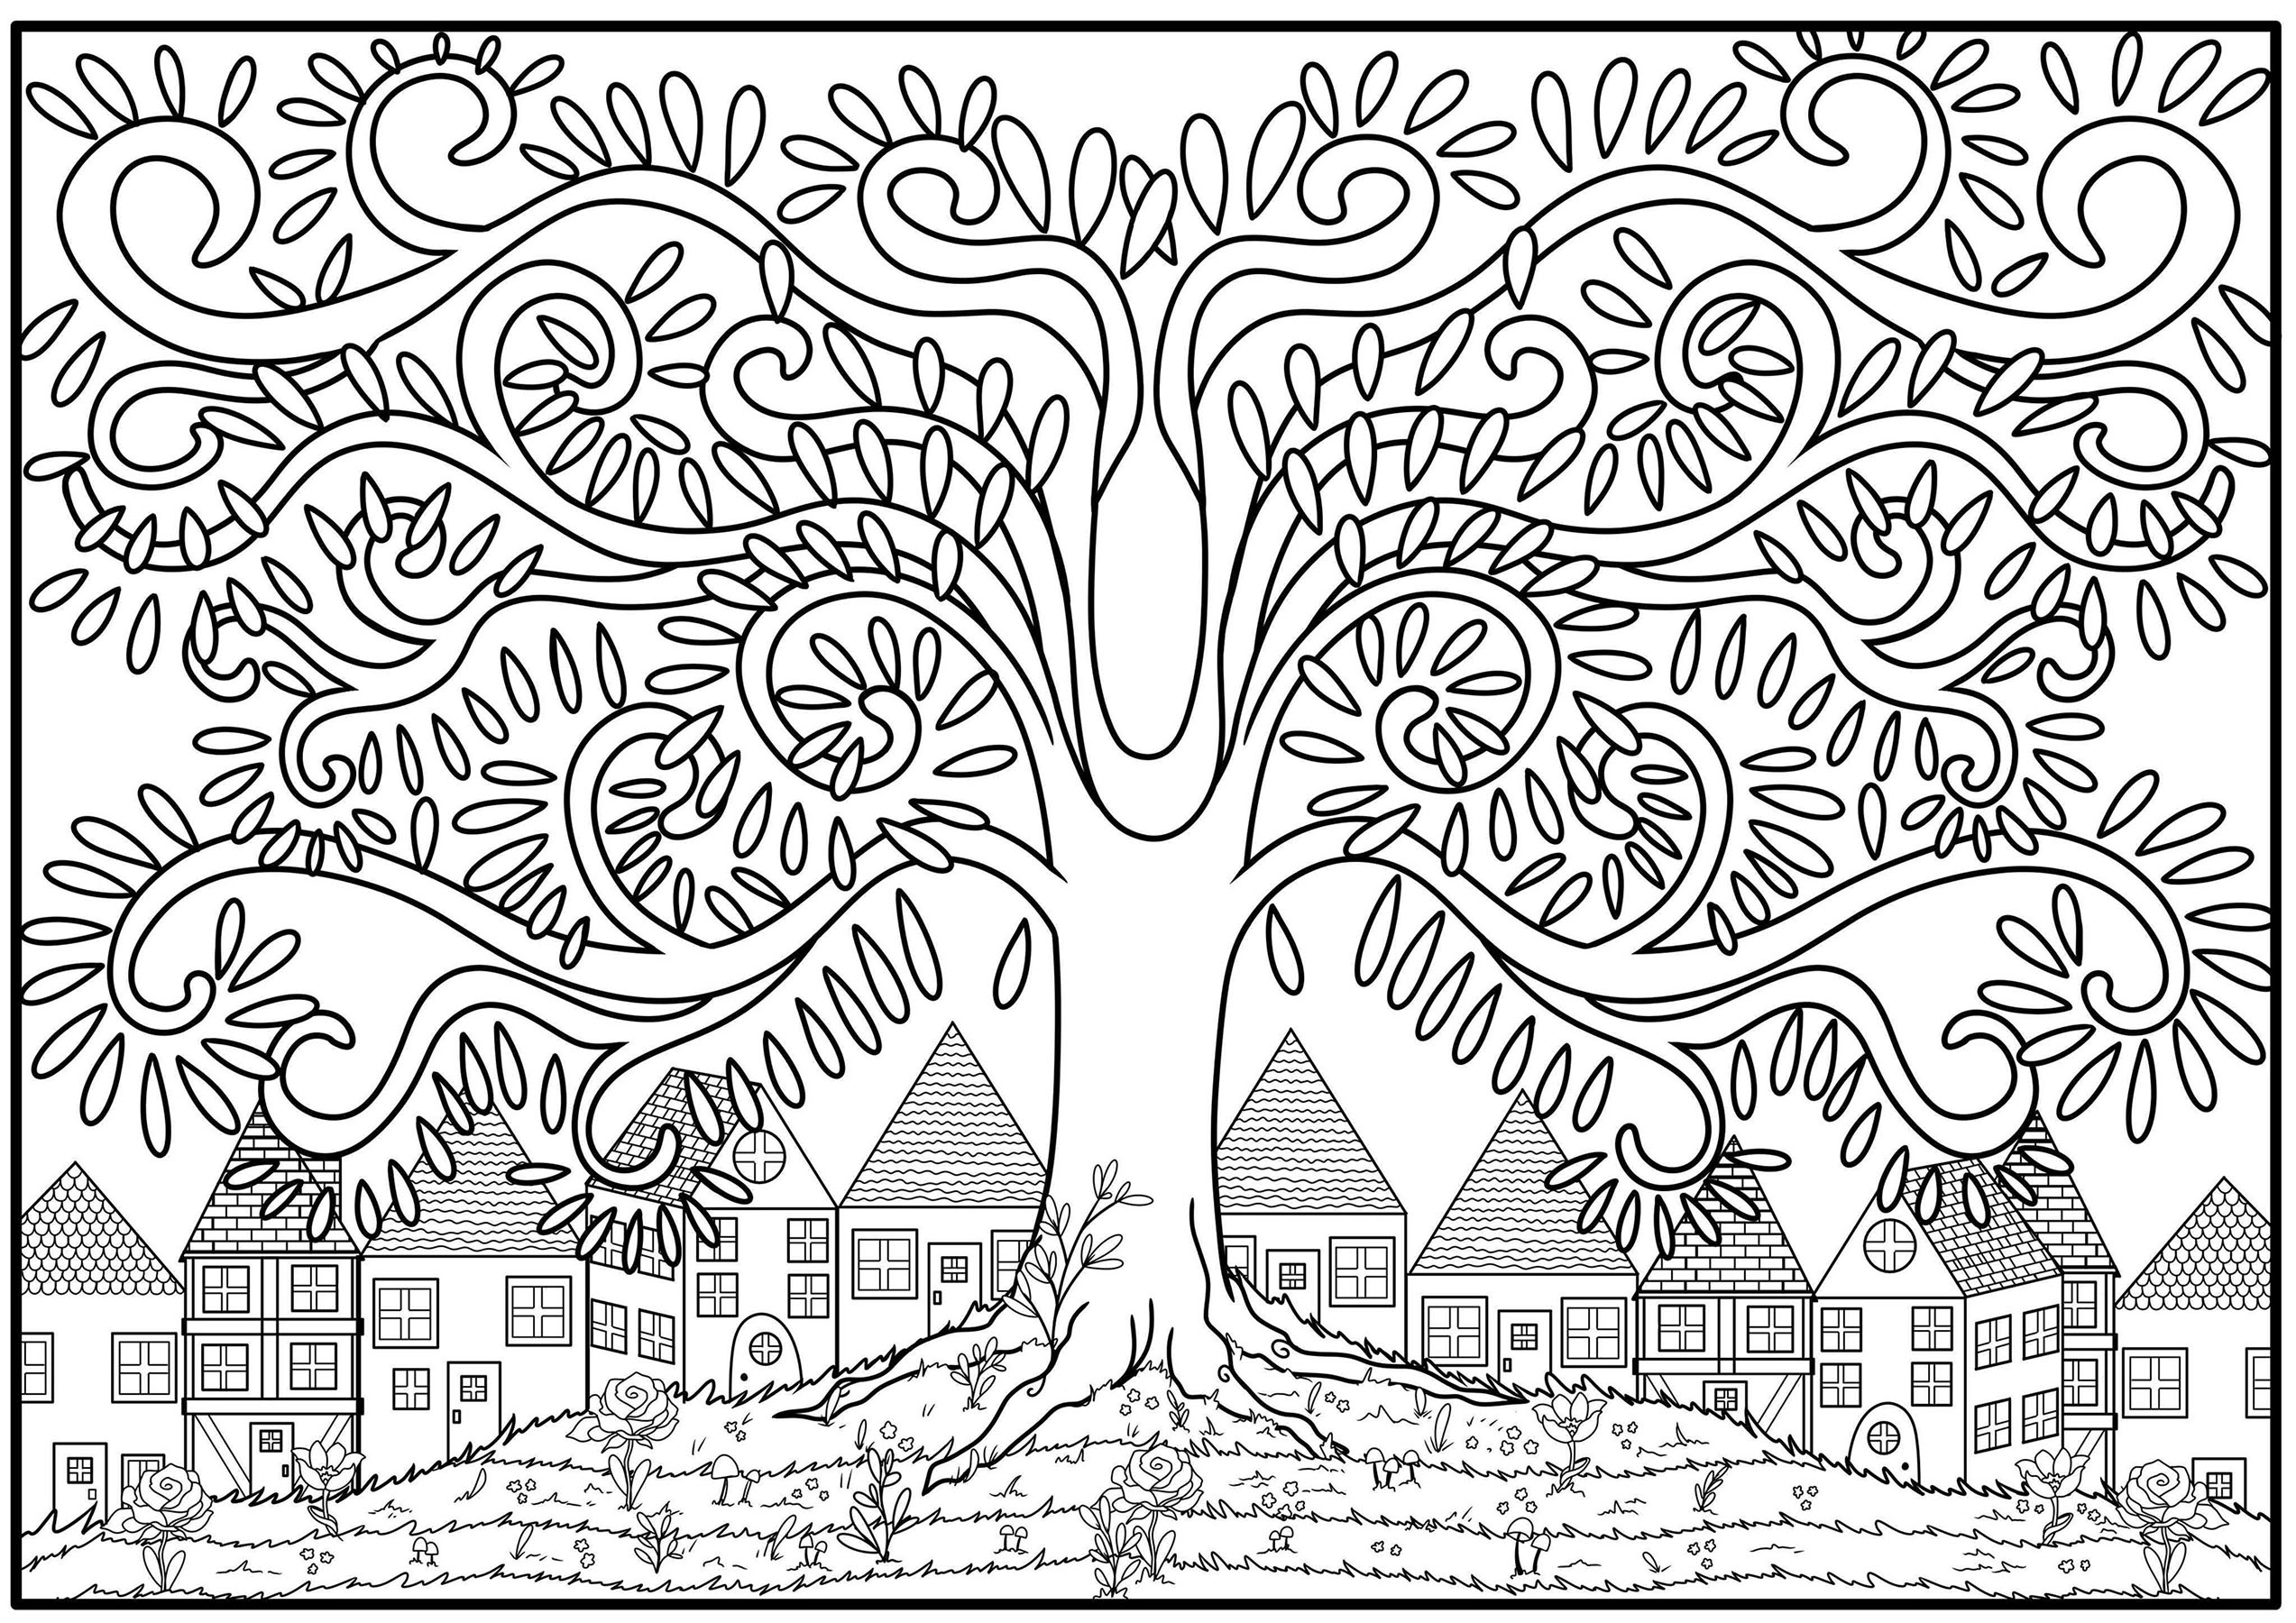 Coloring page of a tree with branch in the shape of arabesque, at the top of a flowered hill with houses in the background.